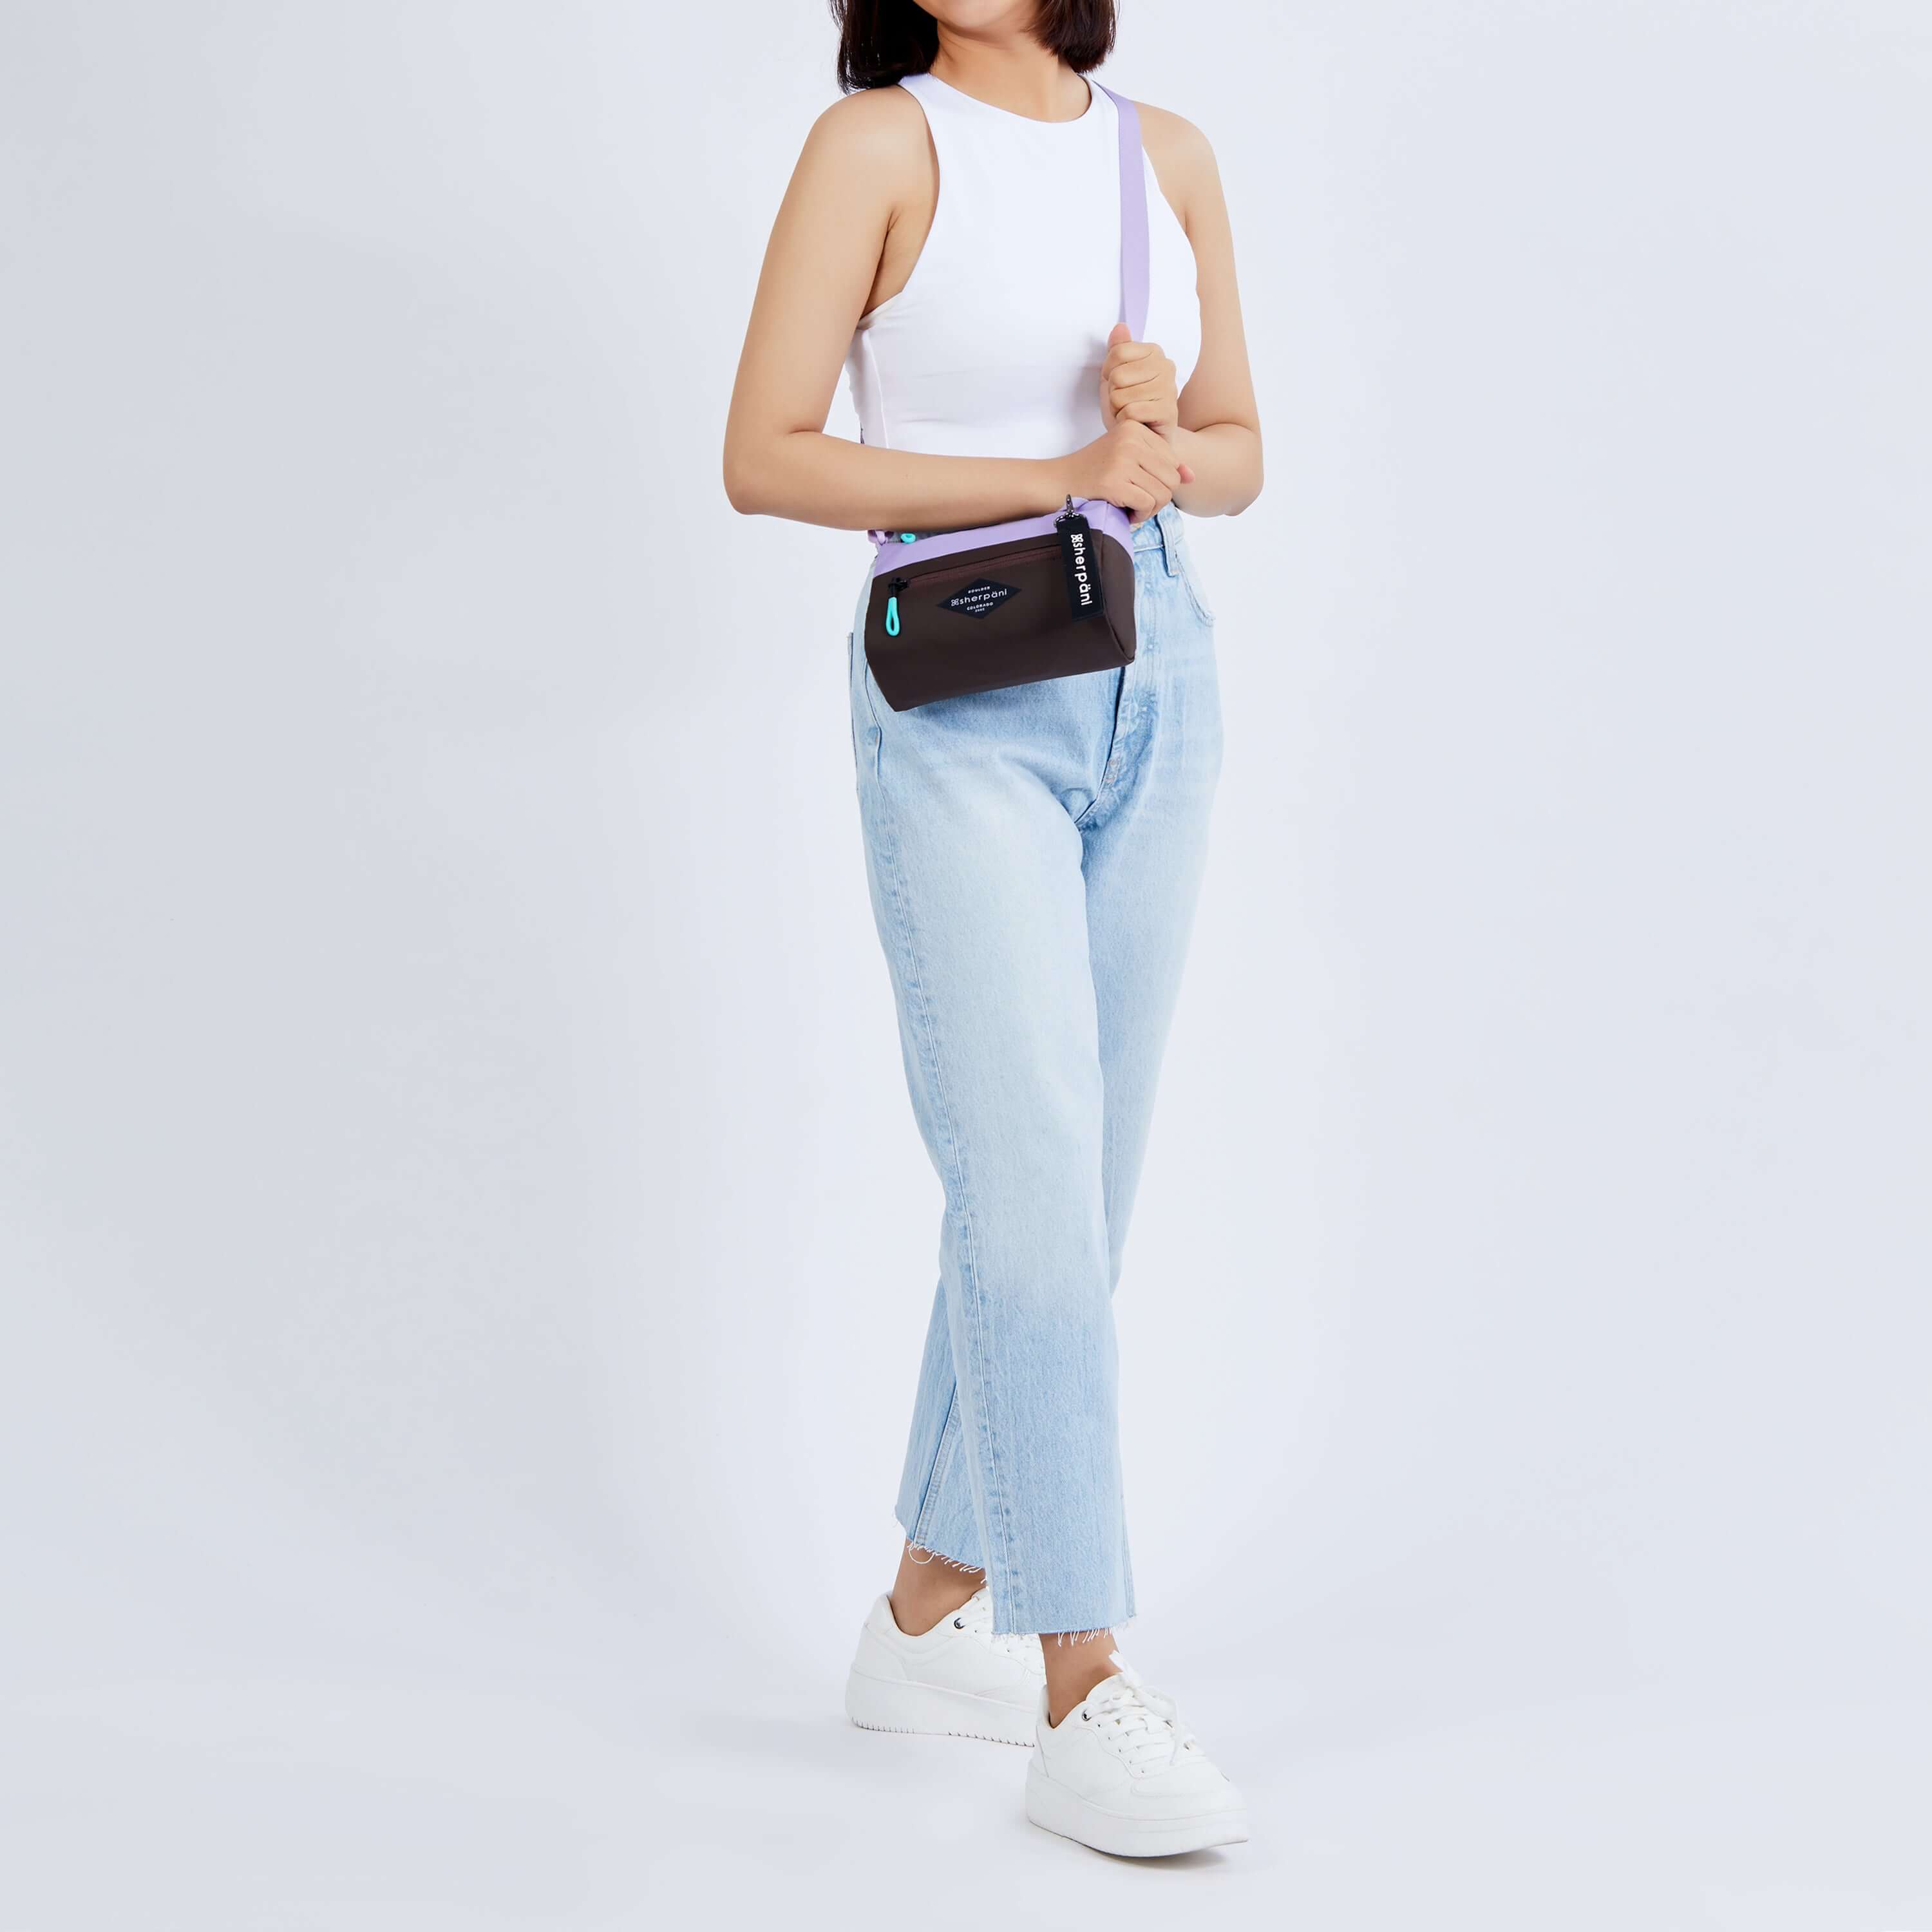 Full body view of a dark haired model facing the camera. She is wearing a white tank top, jeans and white sneakers. She carries Sherpani's purse, the Skye in Lavender, as a crossbody. 